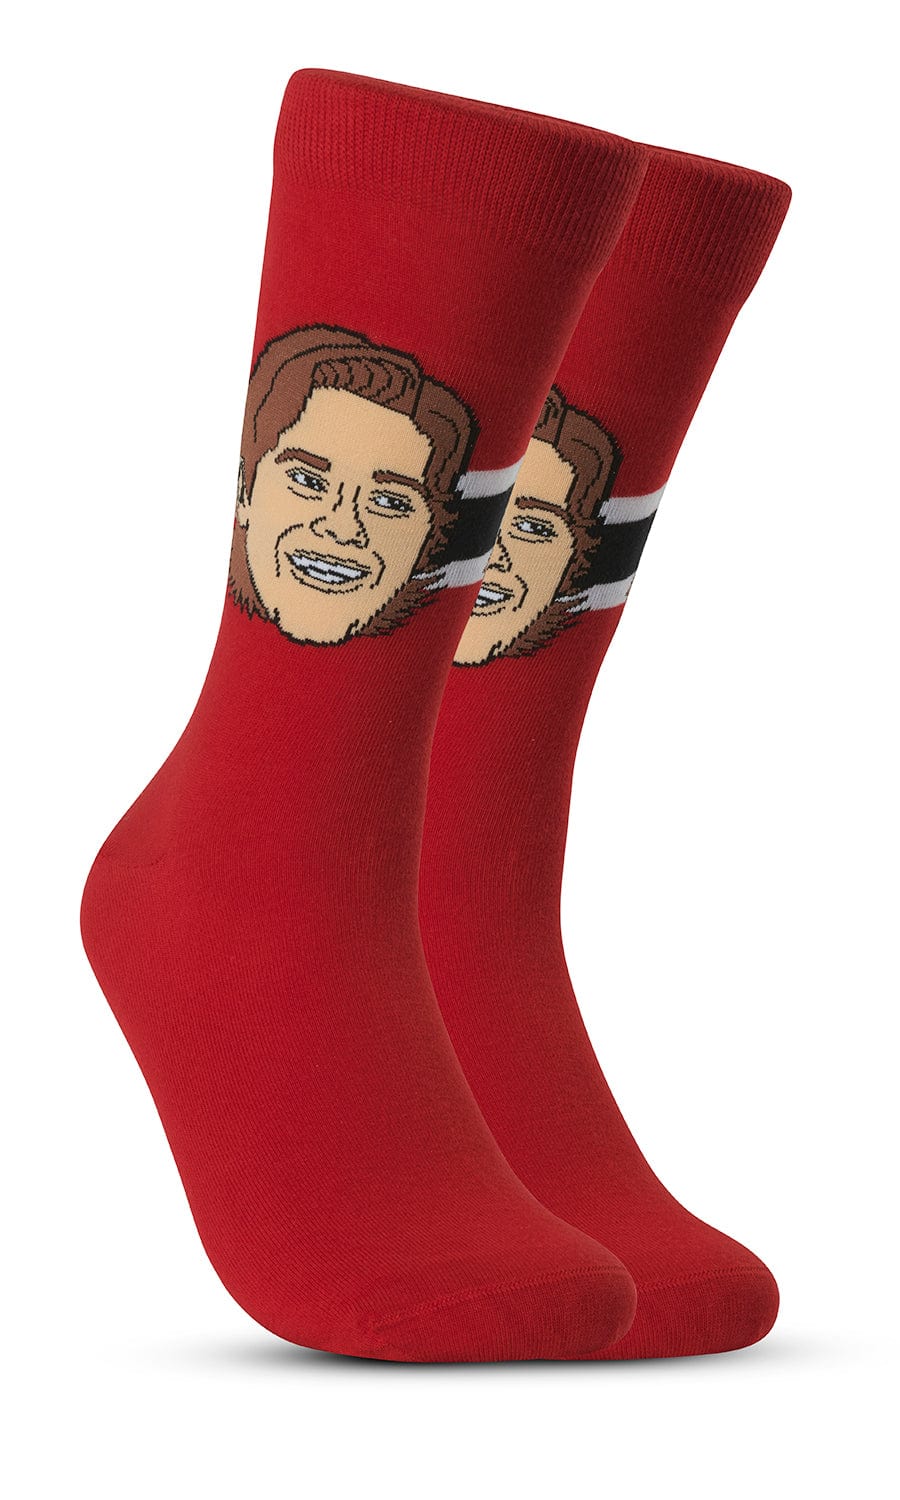 New Jersey Devils Major League Socks - The Hockey Shop Source For Sports